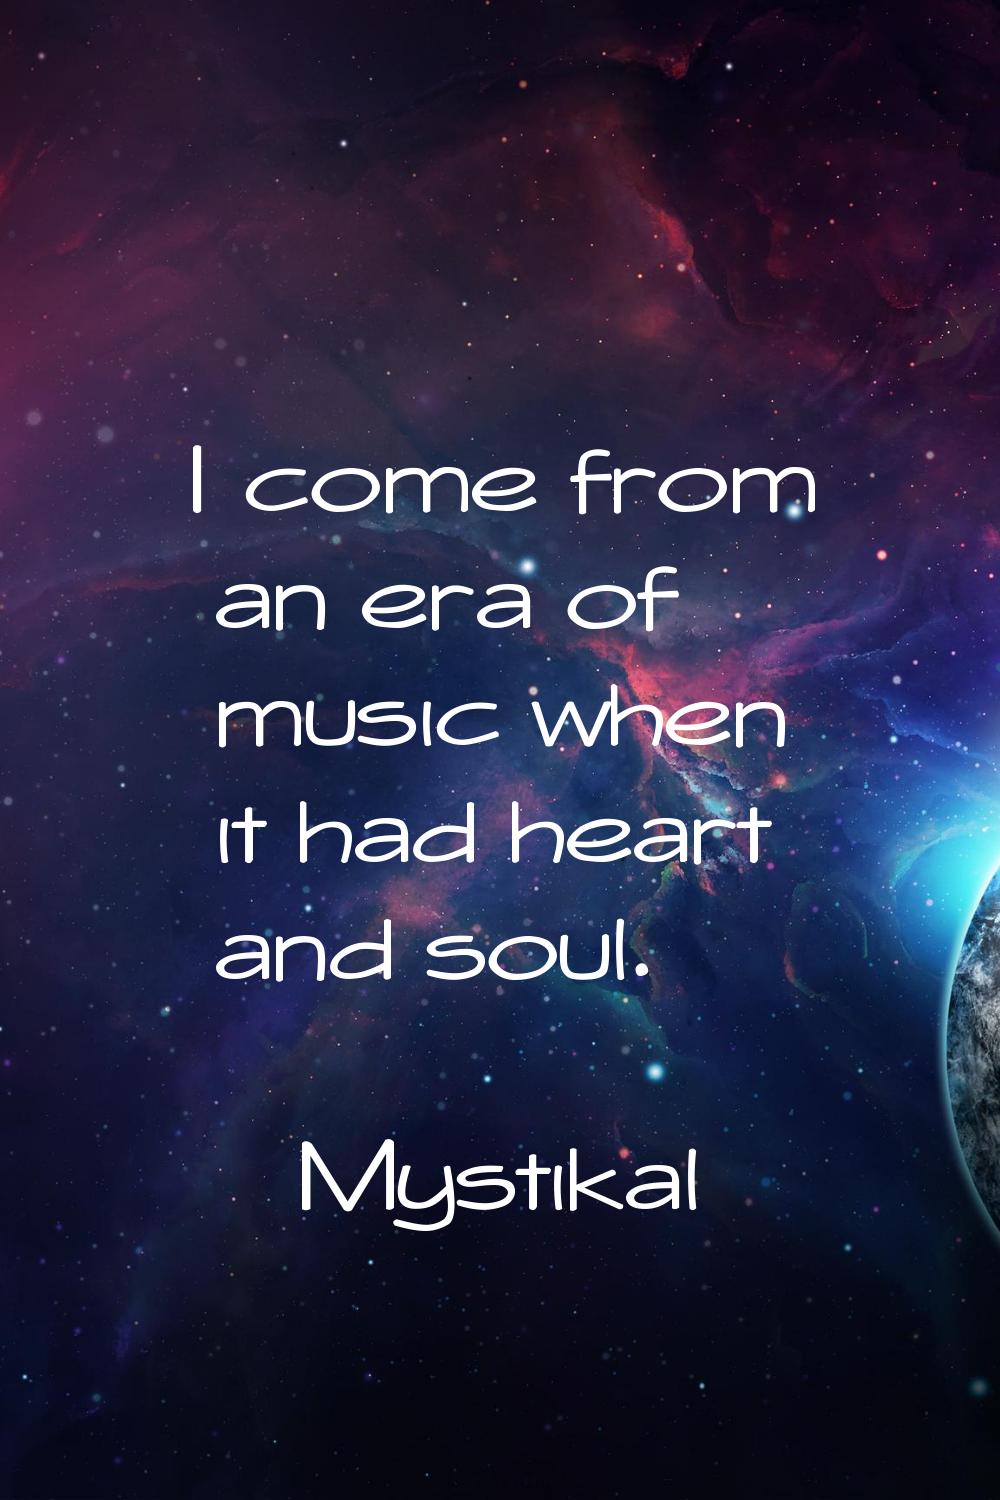 I come from an era of music when it had heart and soul.